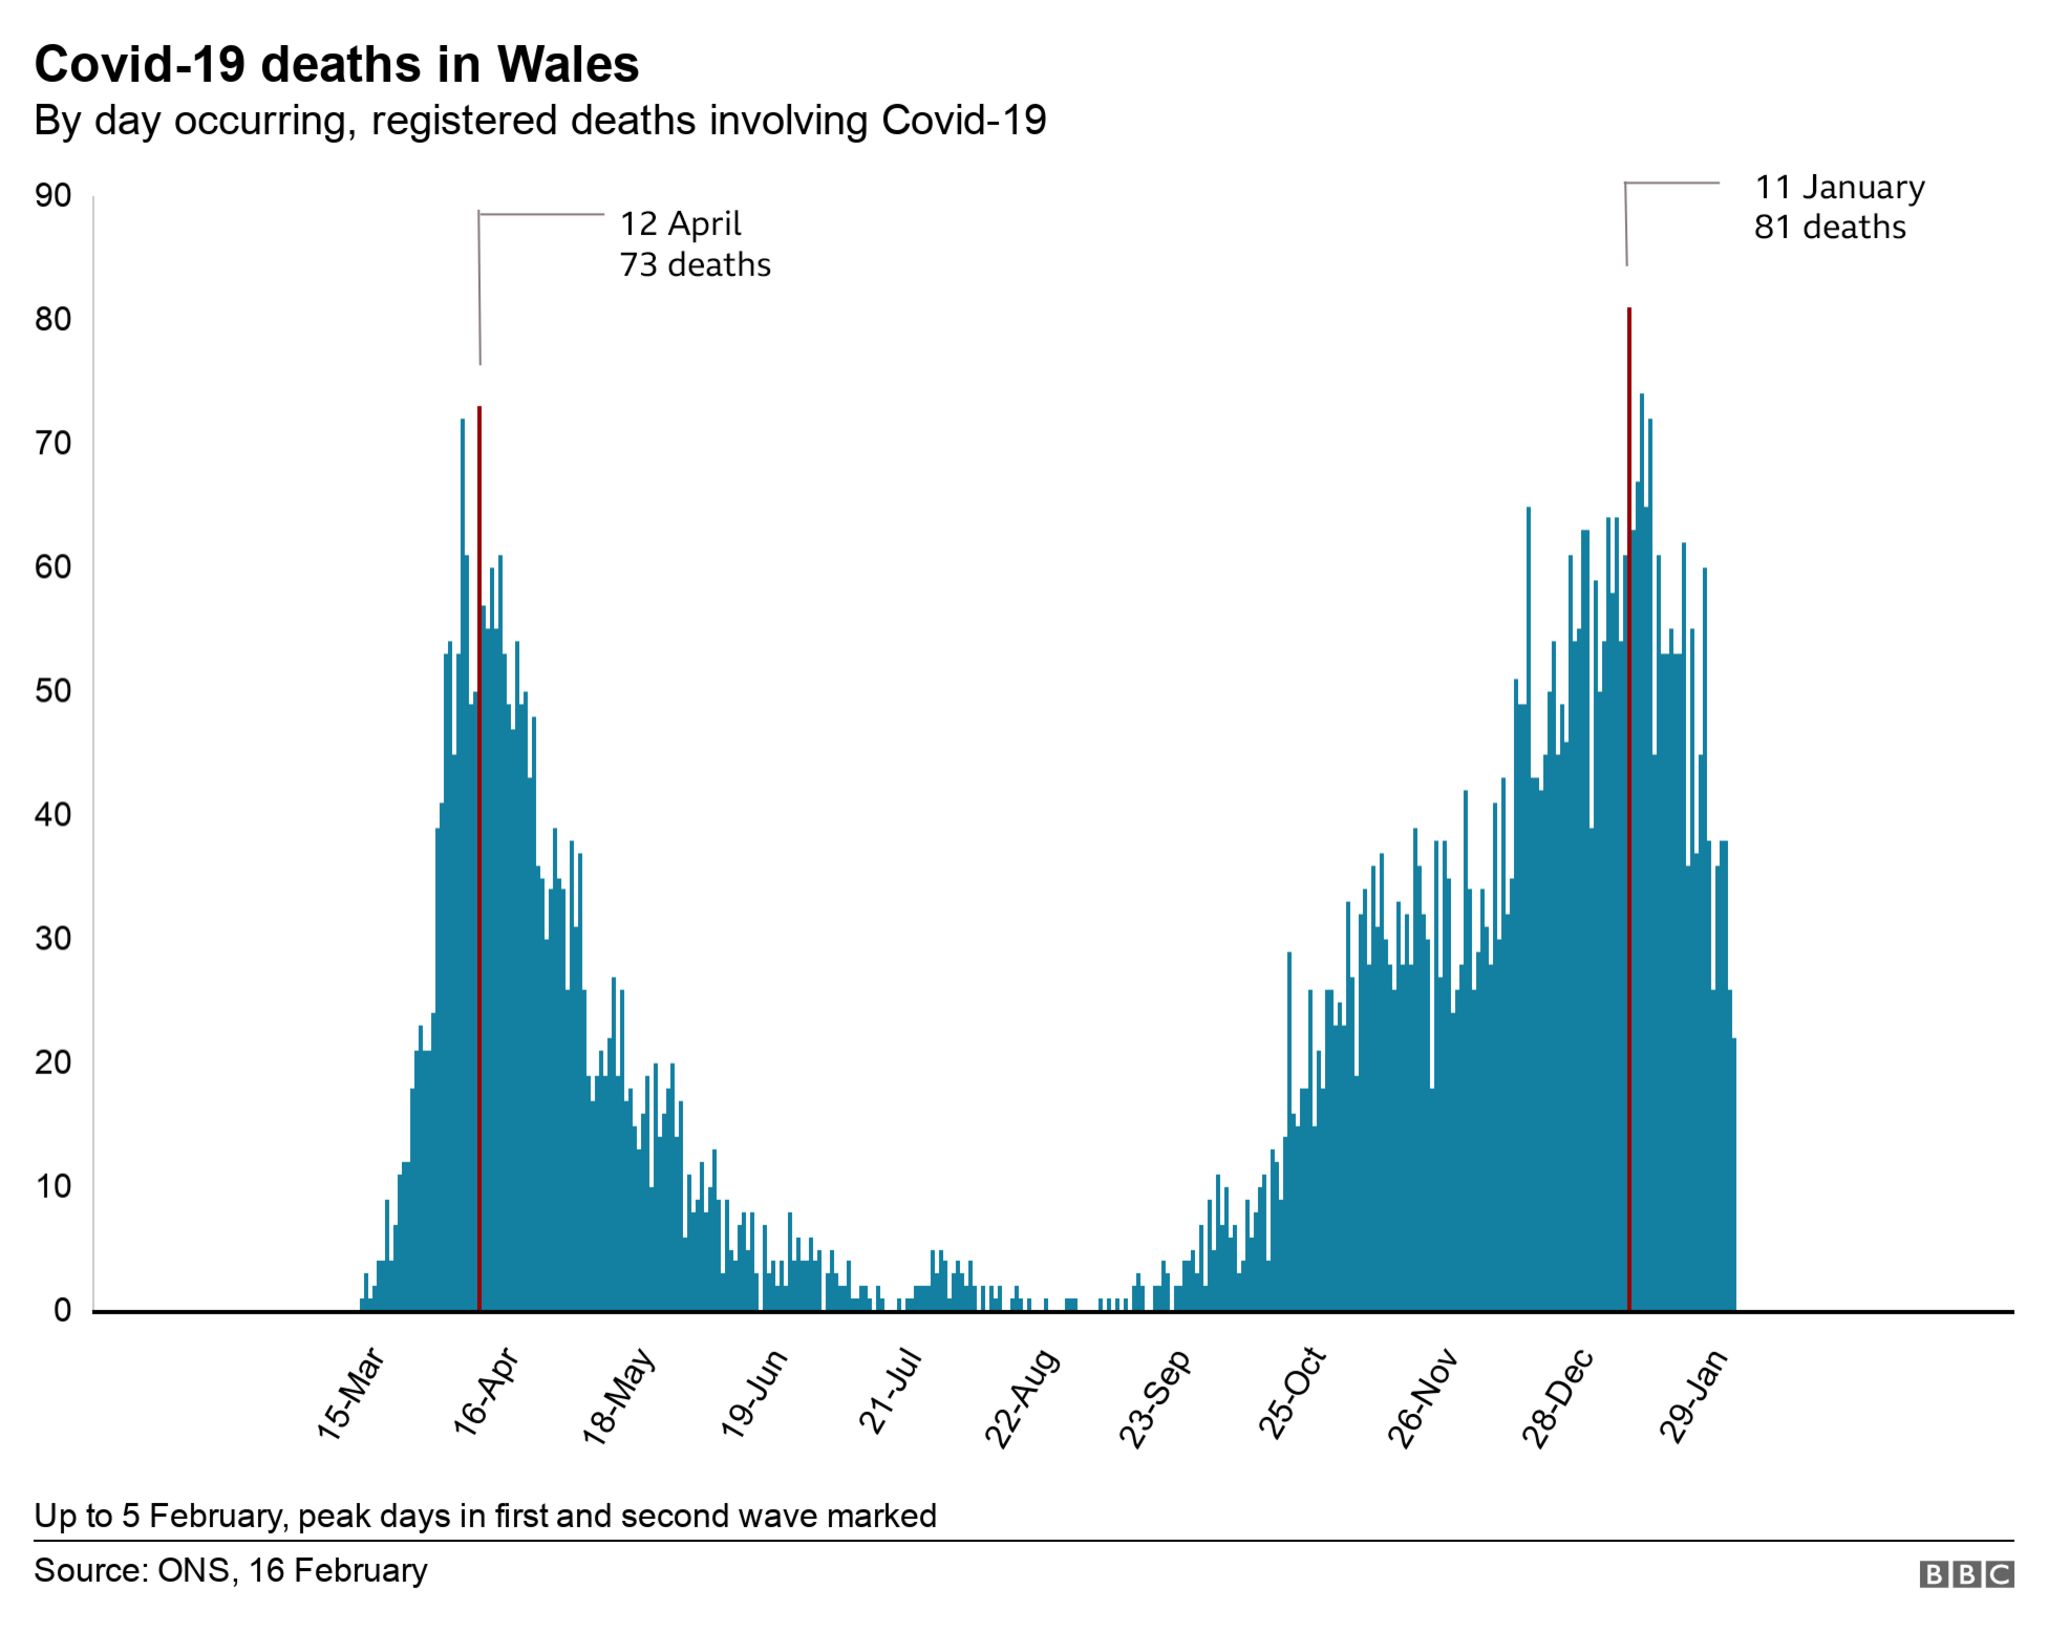 Covid deaths pass 7,000 mark in Wales BBC News